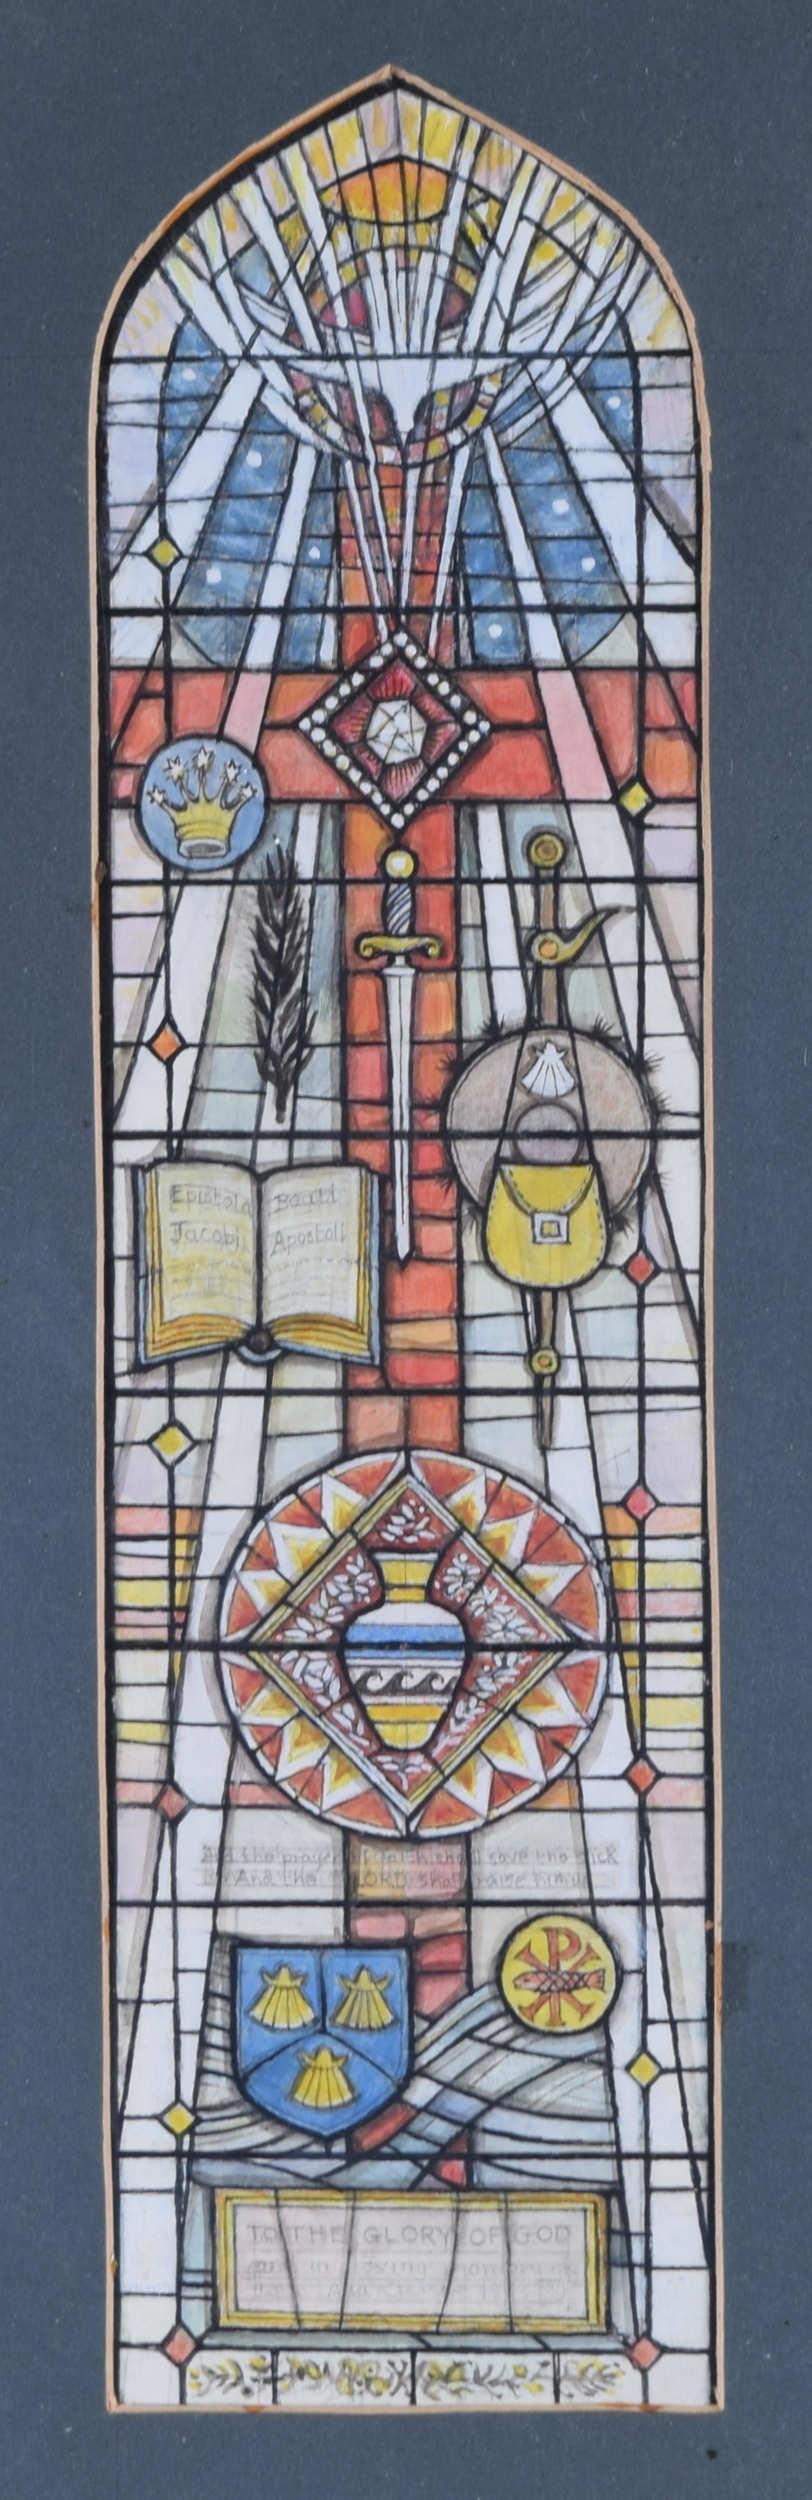 We acquired a series of watercolour stained glass designs from Jane Gray's studio. To find more scroll down to "More from this Seller" and below it click on "See all from this seller." 

Jane Gray (b.1931)
Stained Glass Design
Watercolour
30 x 12